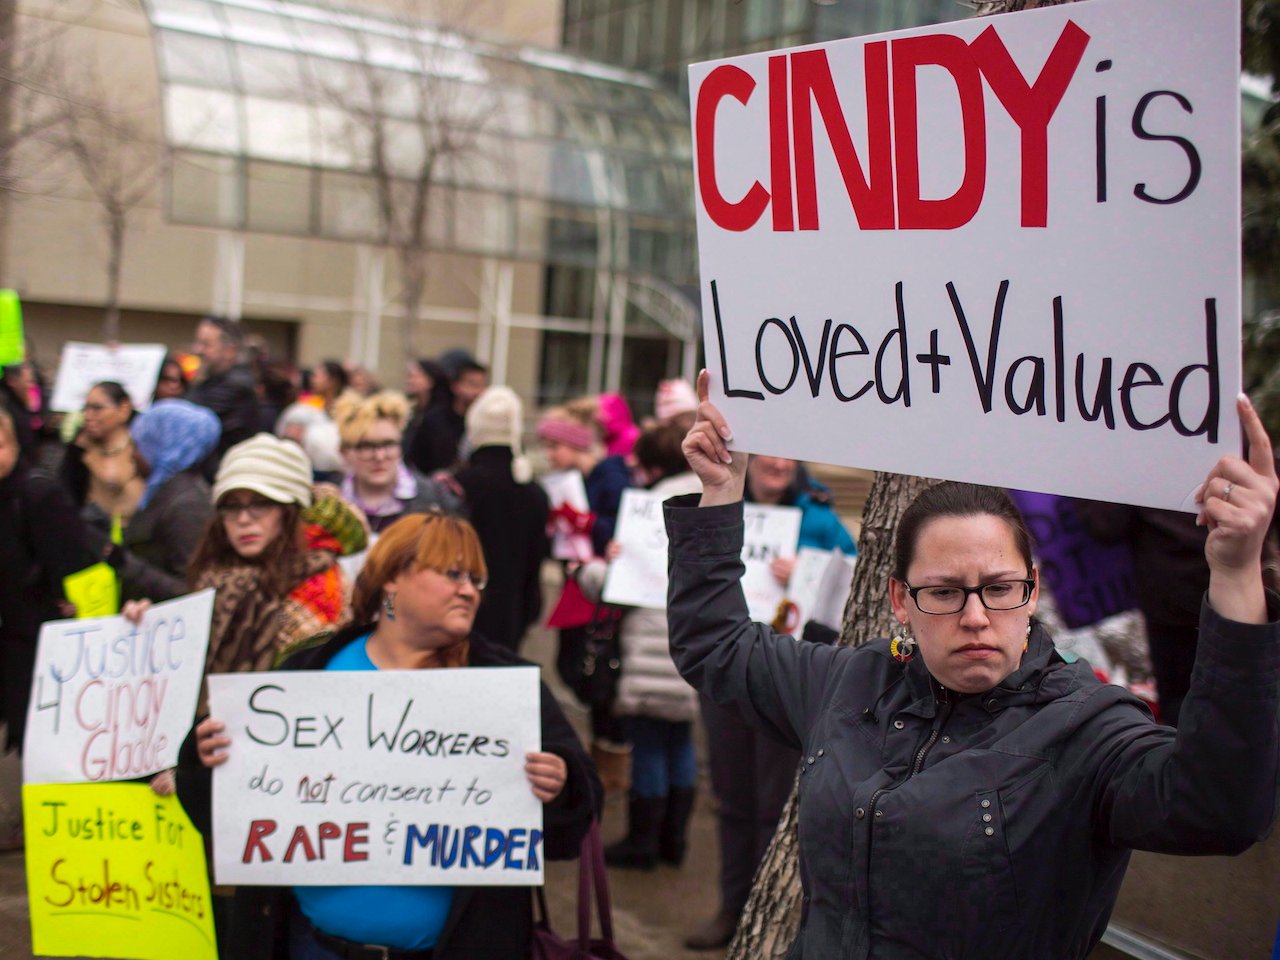 A photo of protesters outside Edmonton's city hall 2015, in support of Cindy Gladue.